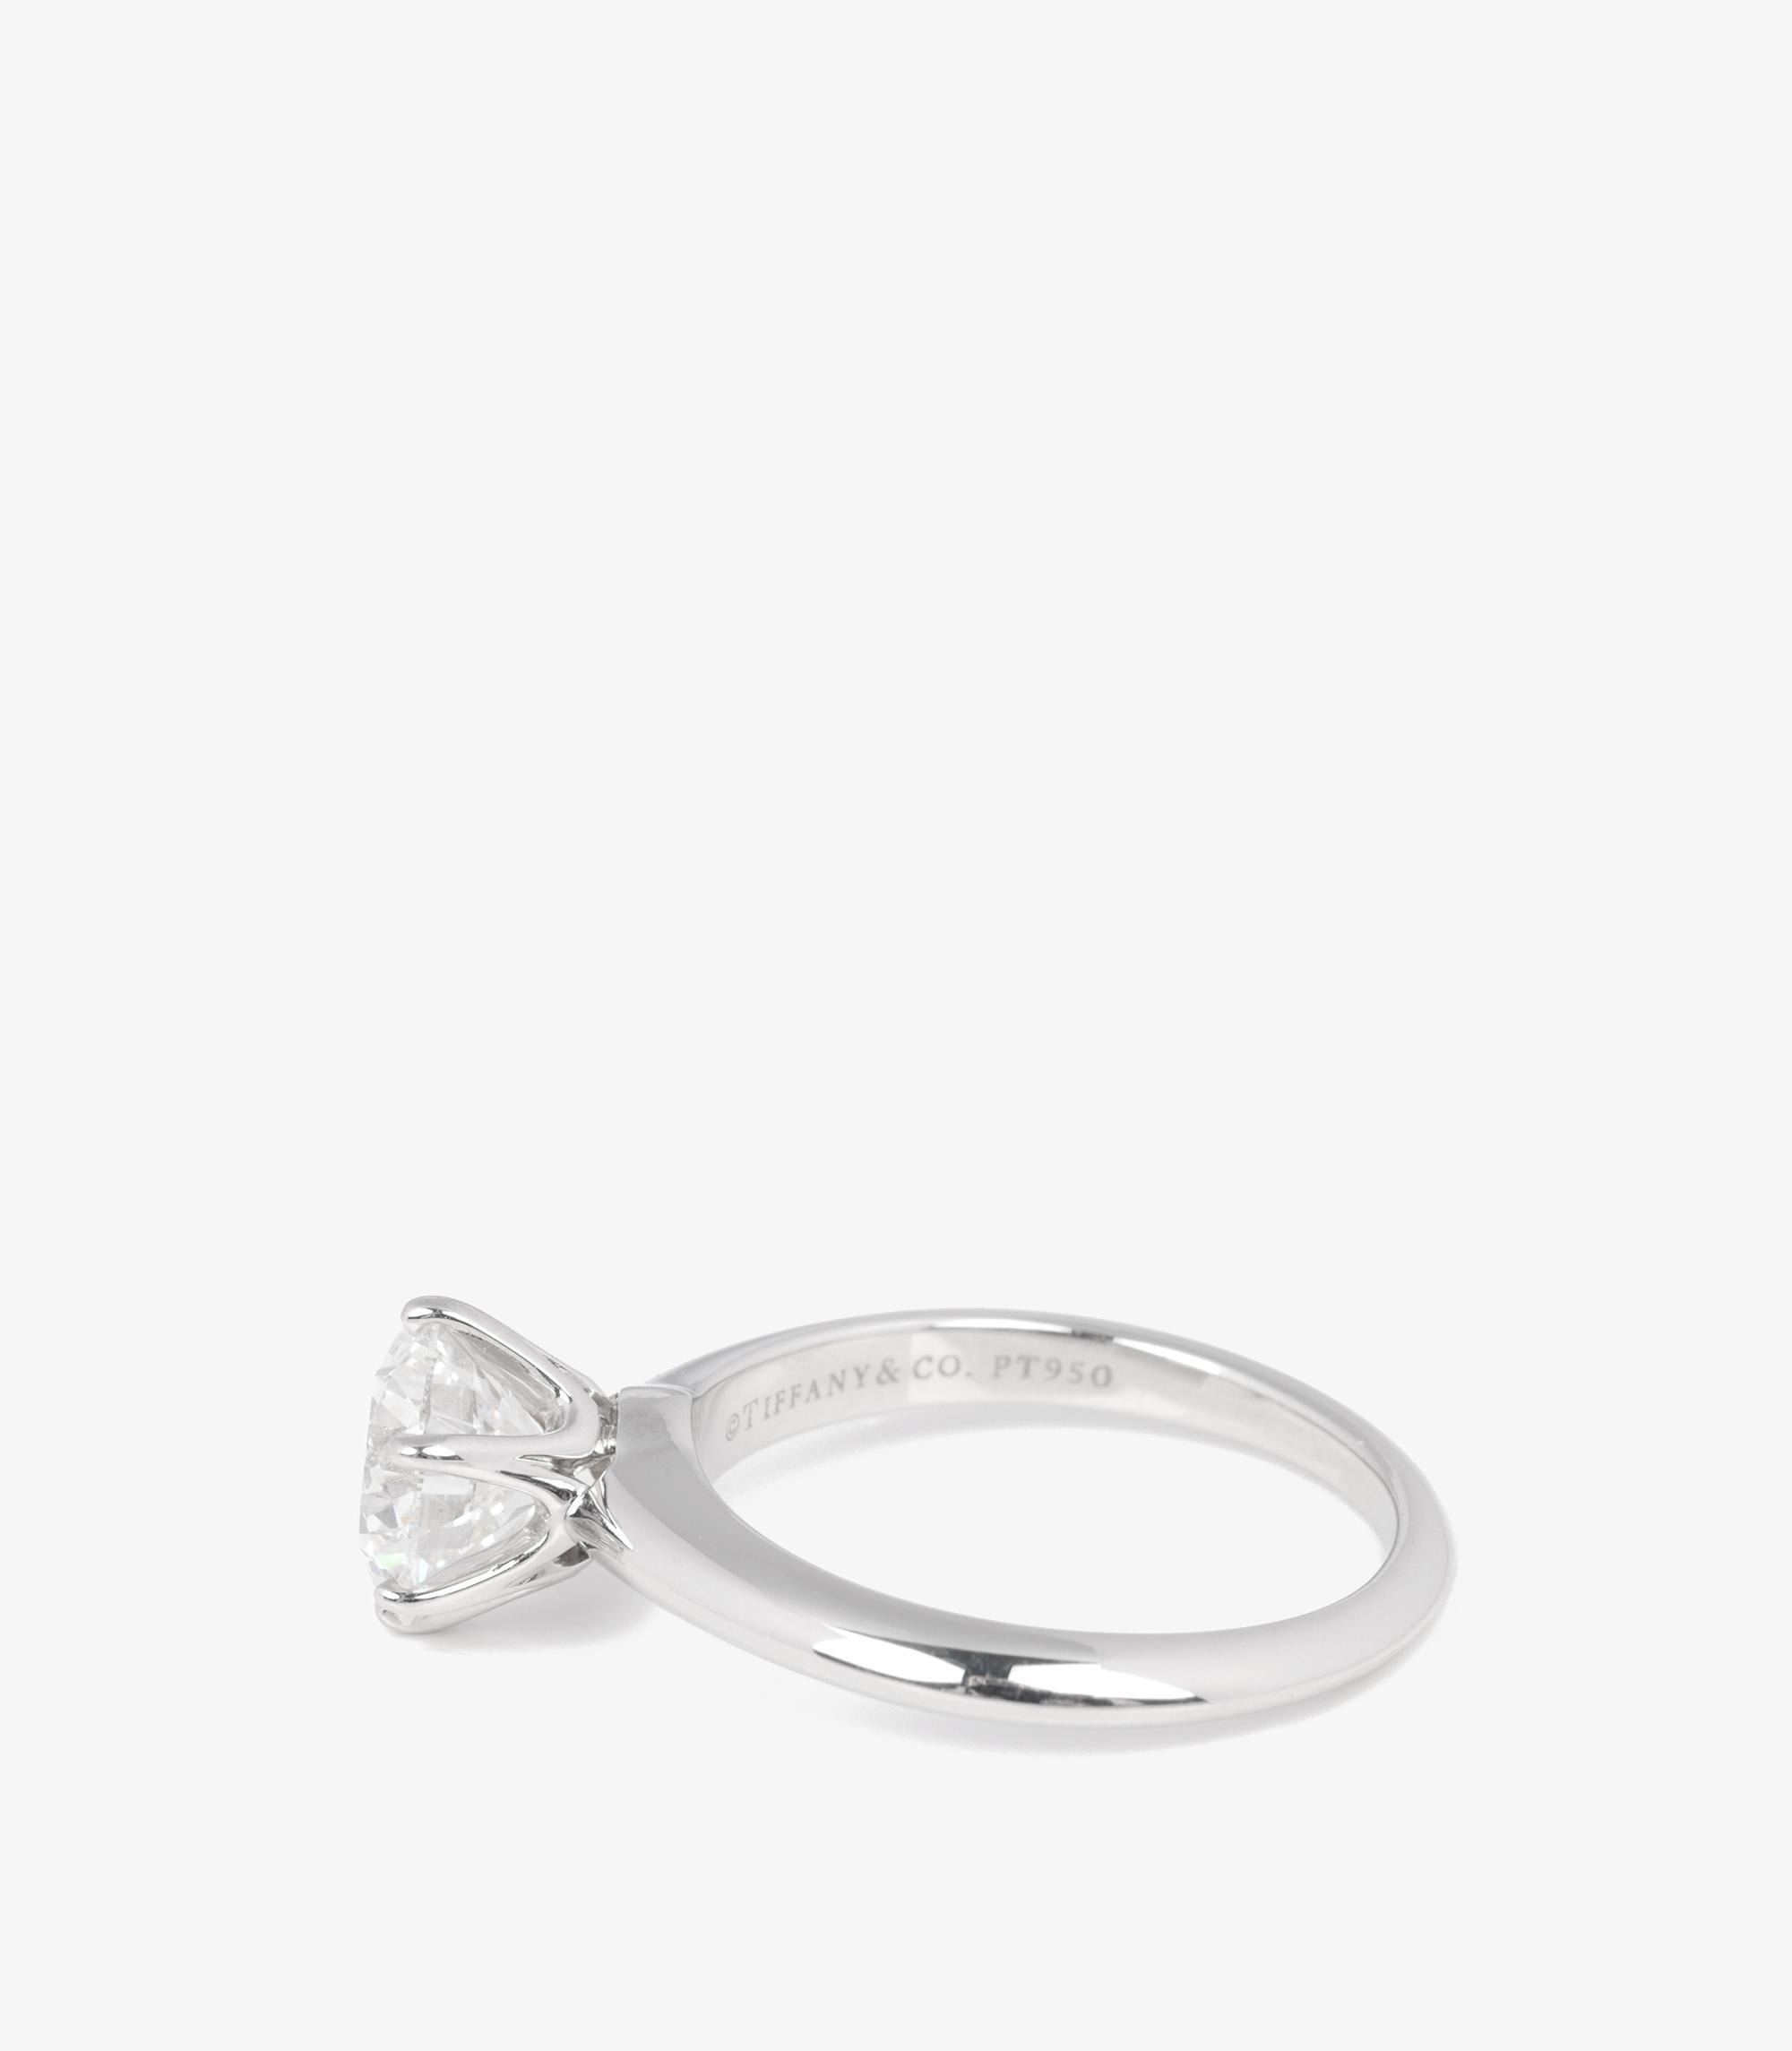 Tiffany & Co. Brilliant Cut 1.73ct Diamond Platinum Tiffany Setting Ring In Excellent Condition For Sale In Bishop's Stortford, Hertfordshire